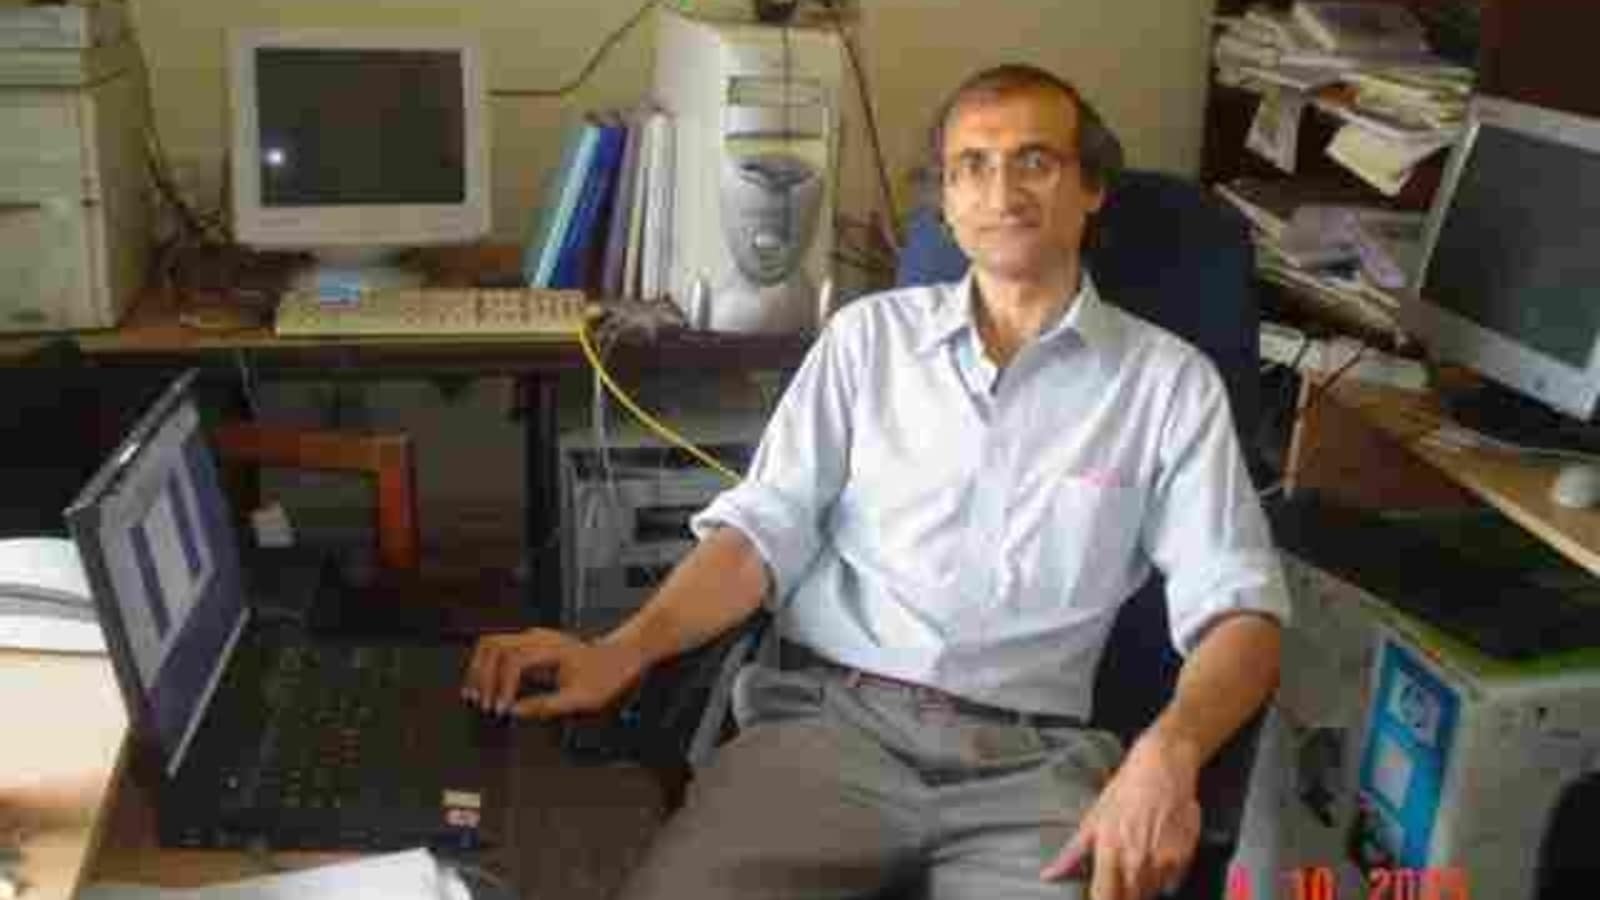 IAU names asteroid named quickly after Indian professor, recognizing his contributions to astronomy